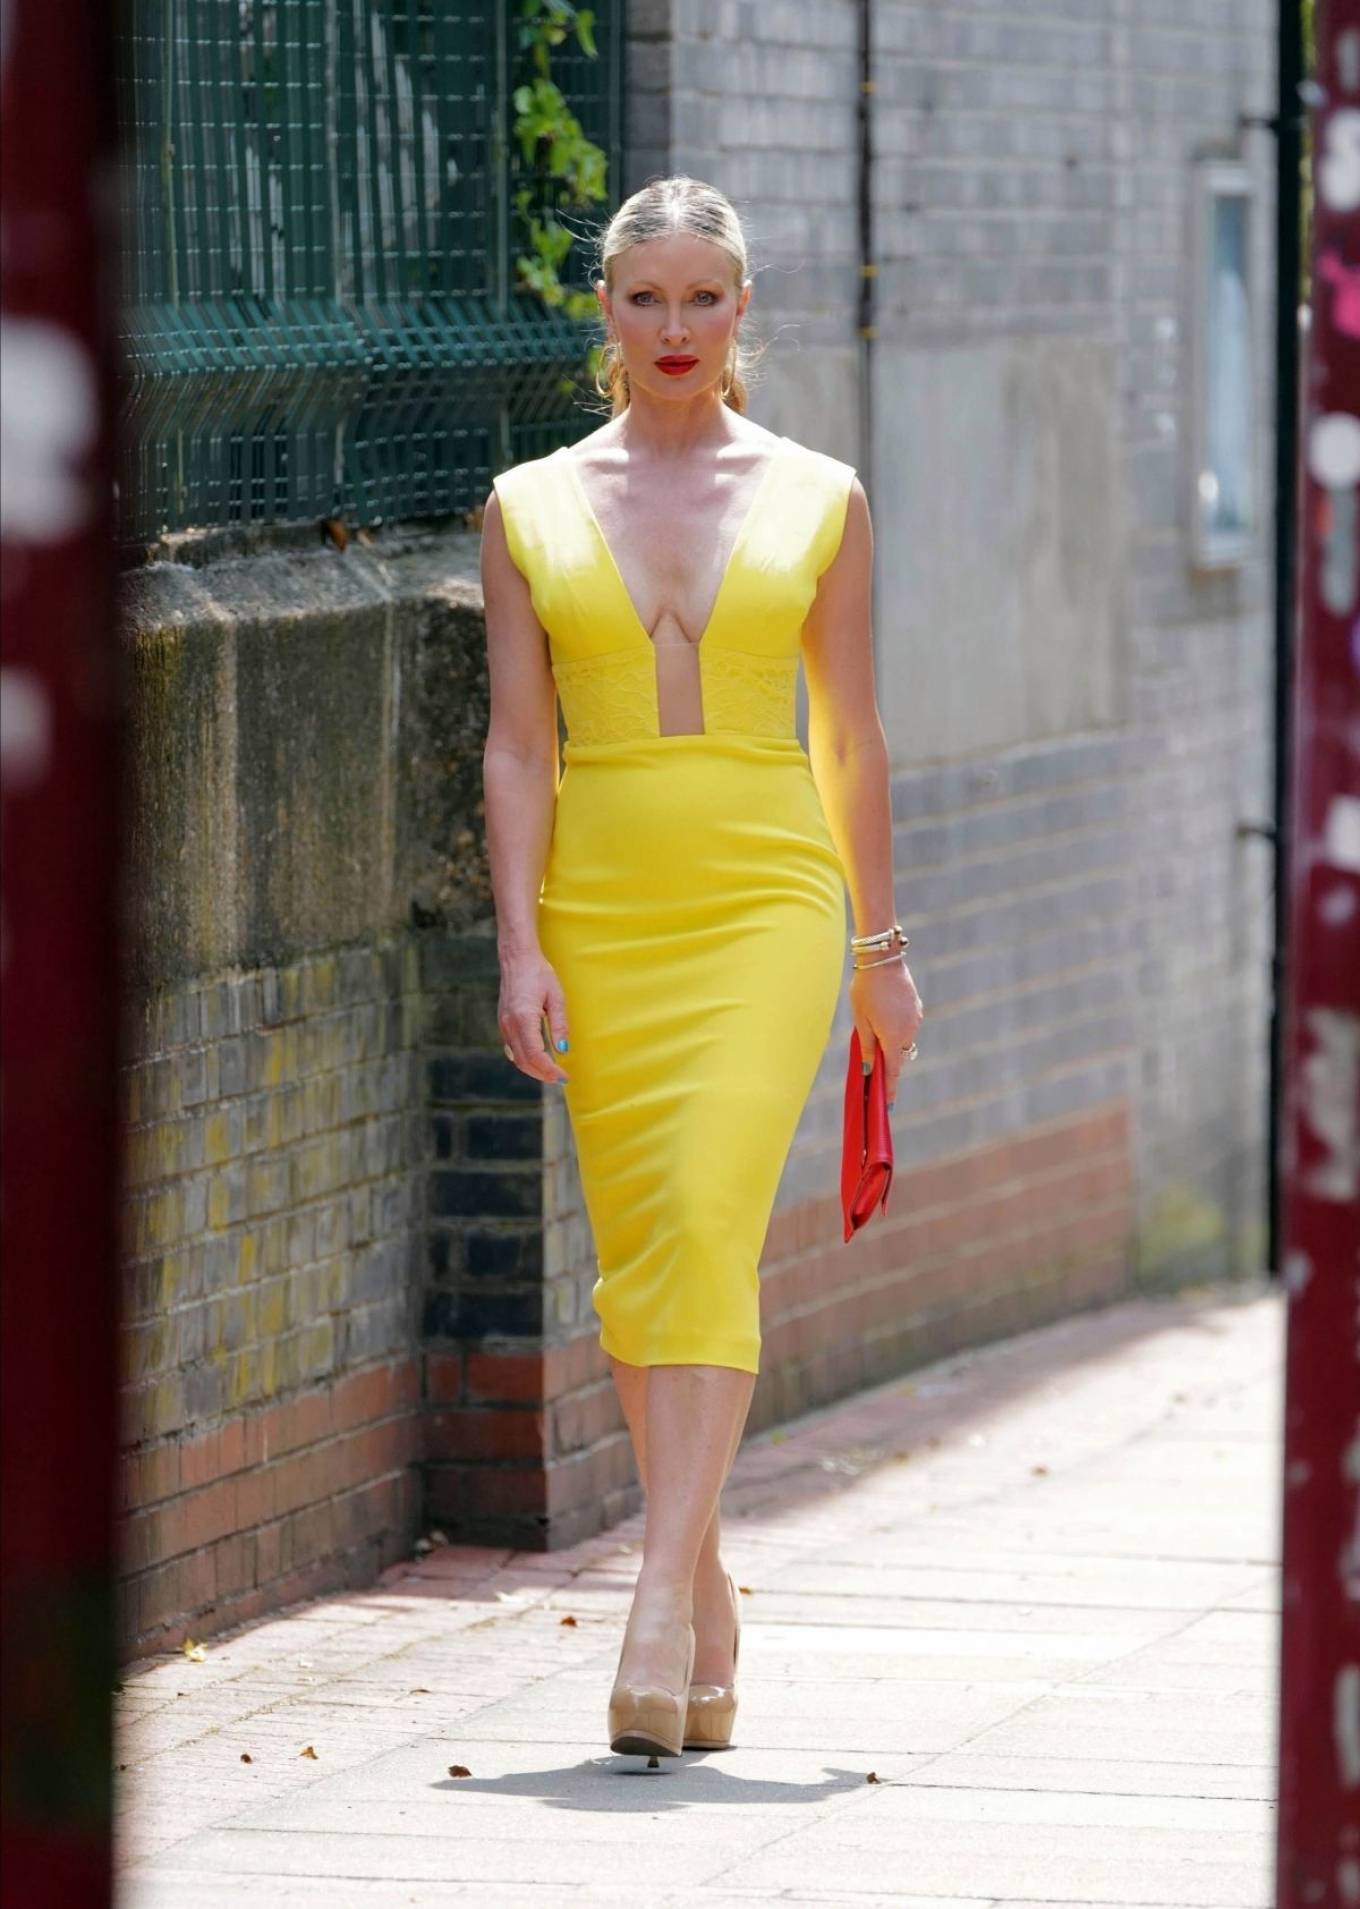 Caprice Bourret 2020 : Caprice Bourret – Pictured in a tight yellow dress while out in London -07